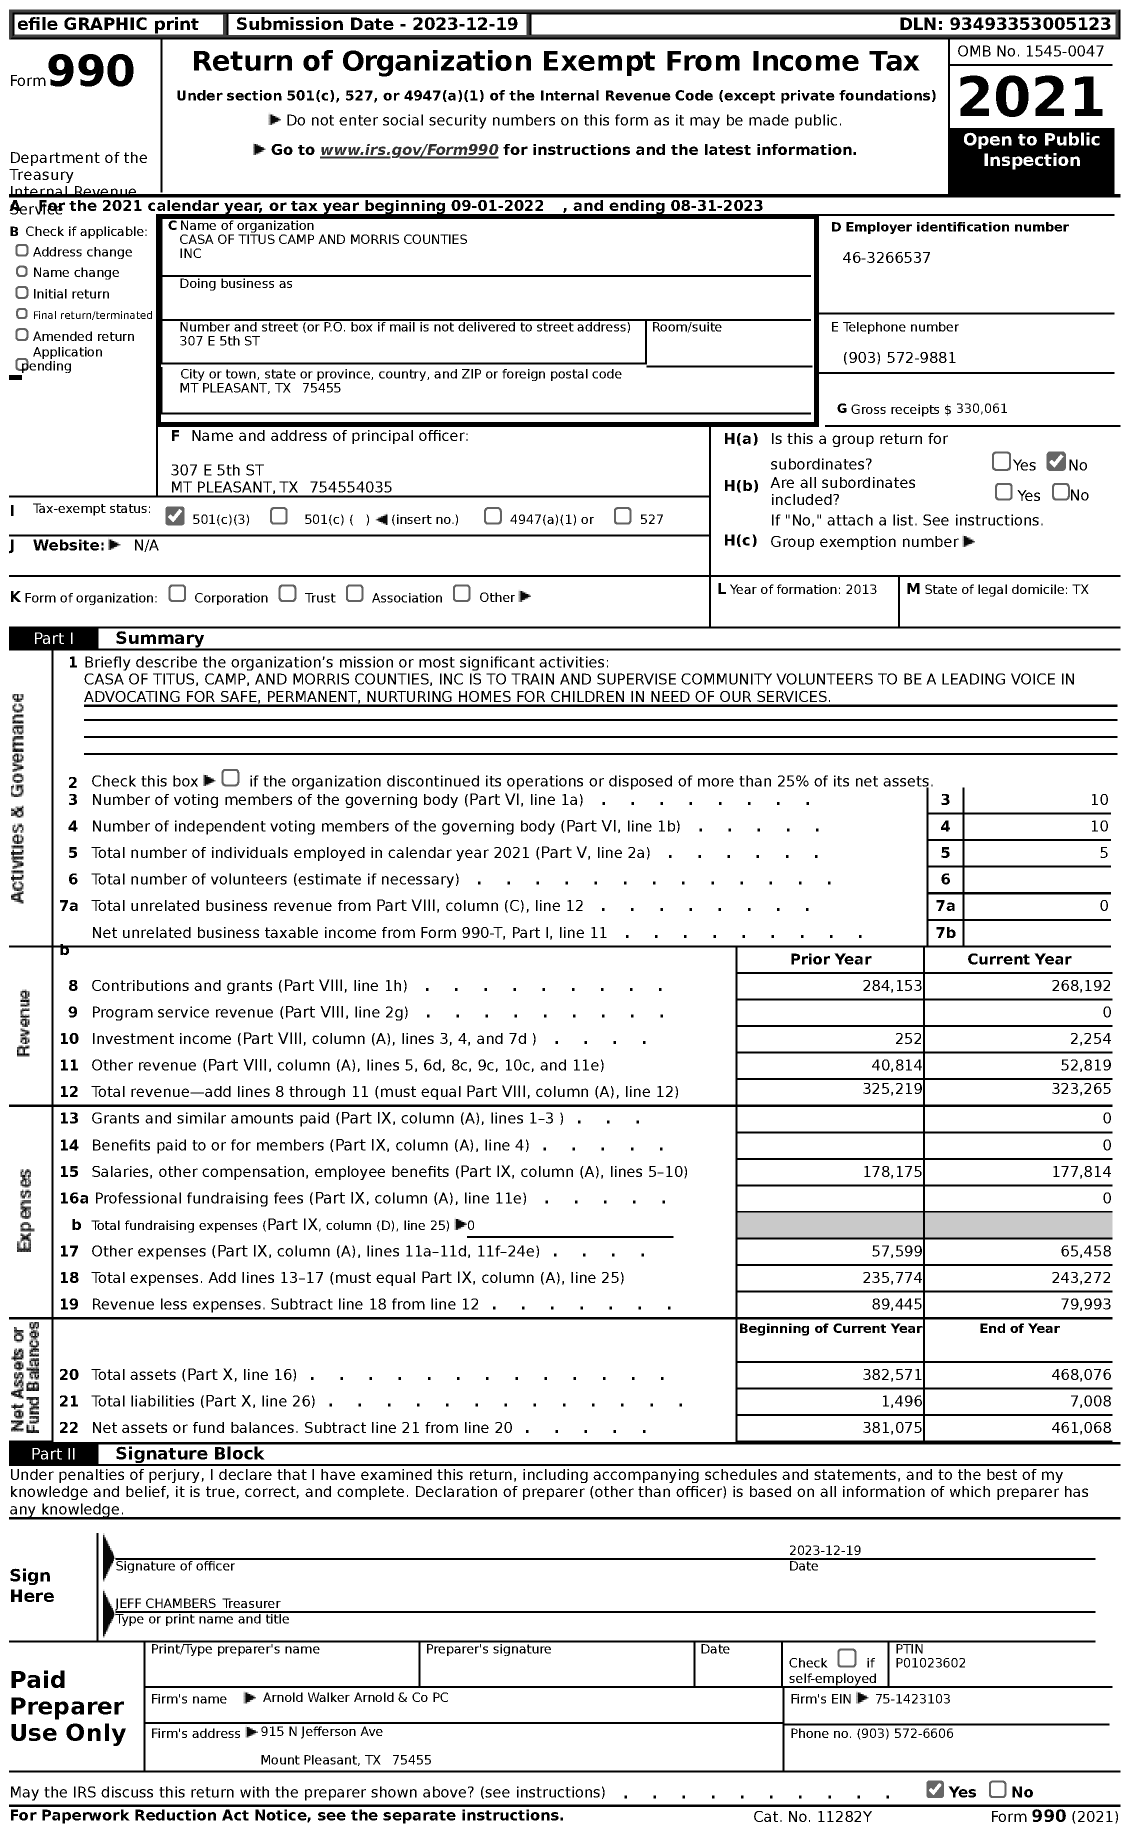 Image of first page of 2022 Form 990 for Casa of Titus Camp and Morris Counties